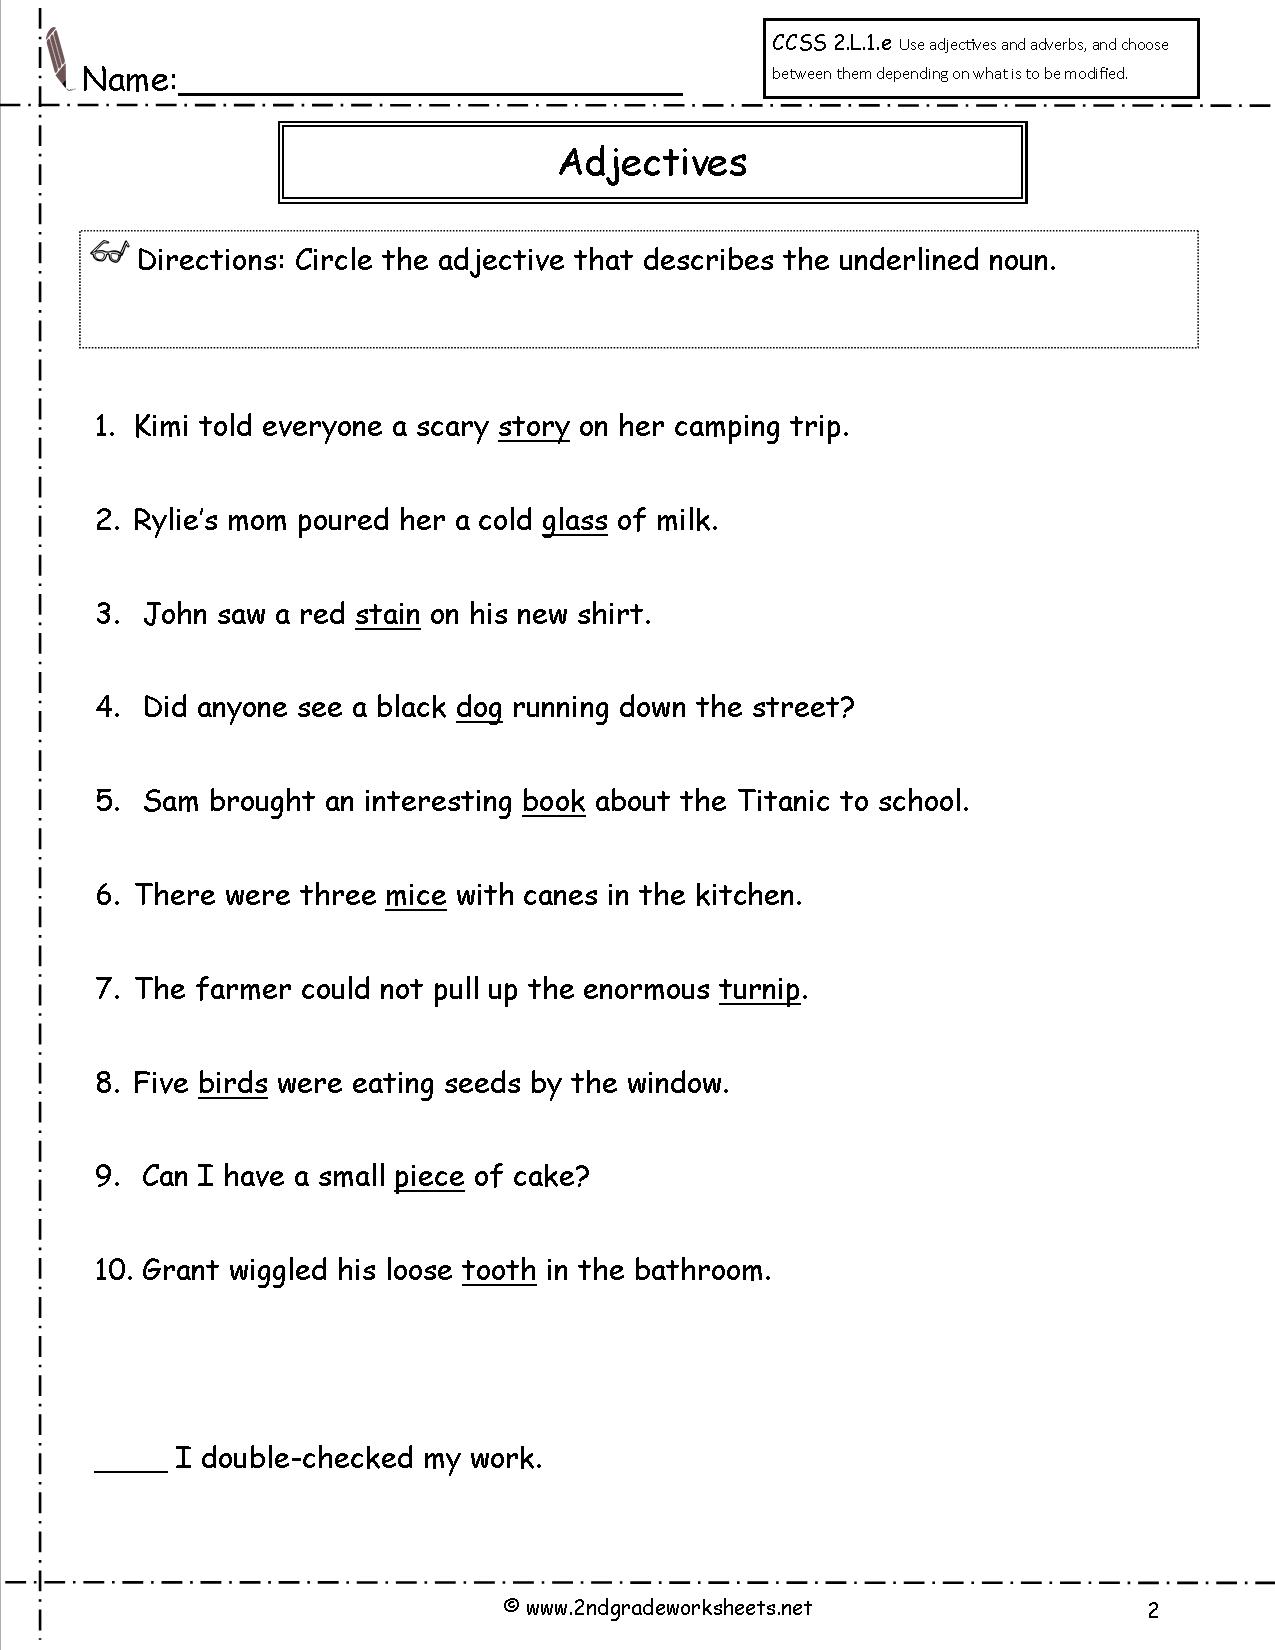 Identifying Adjectives And Articles Worksheets